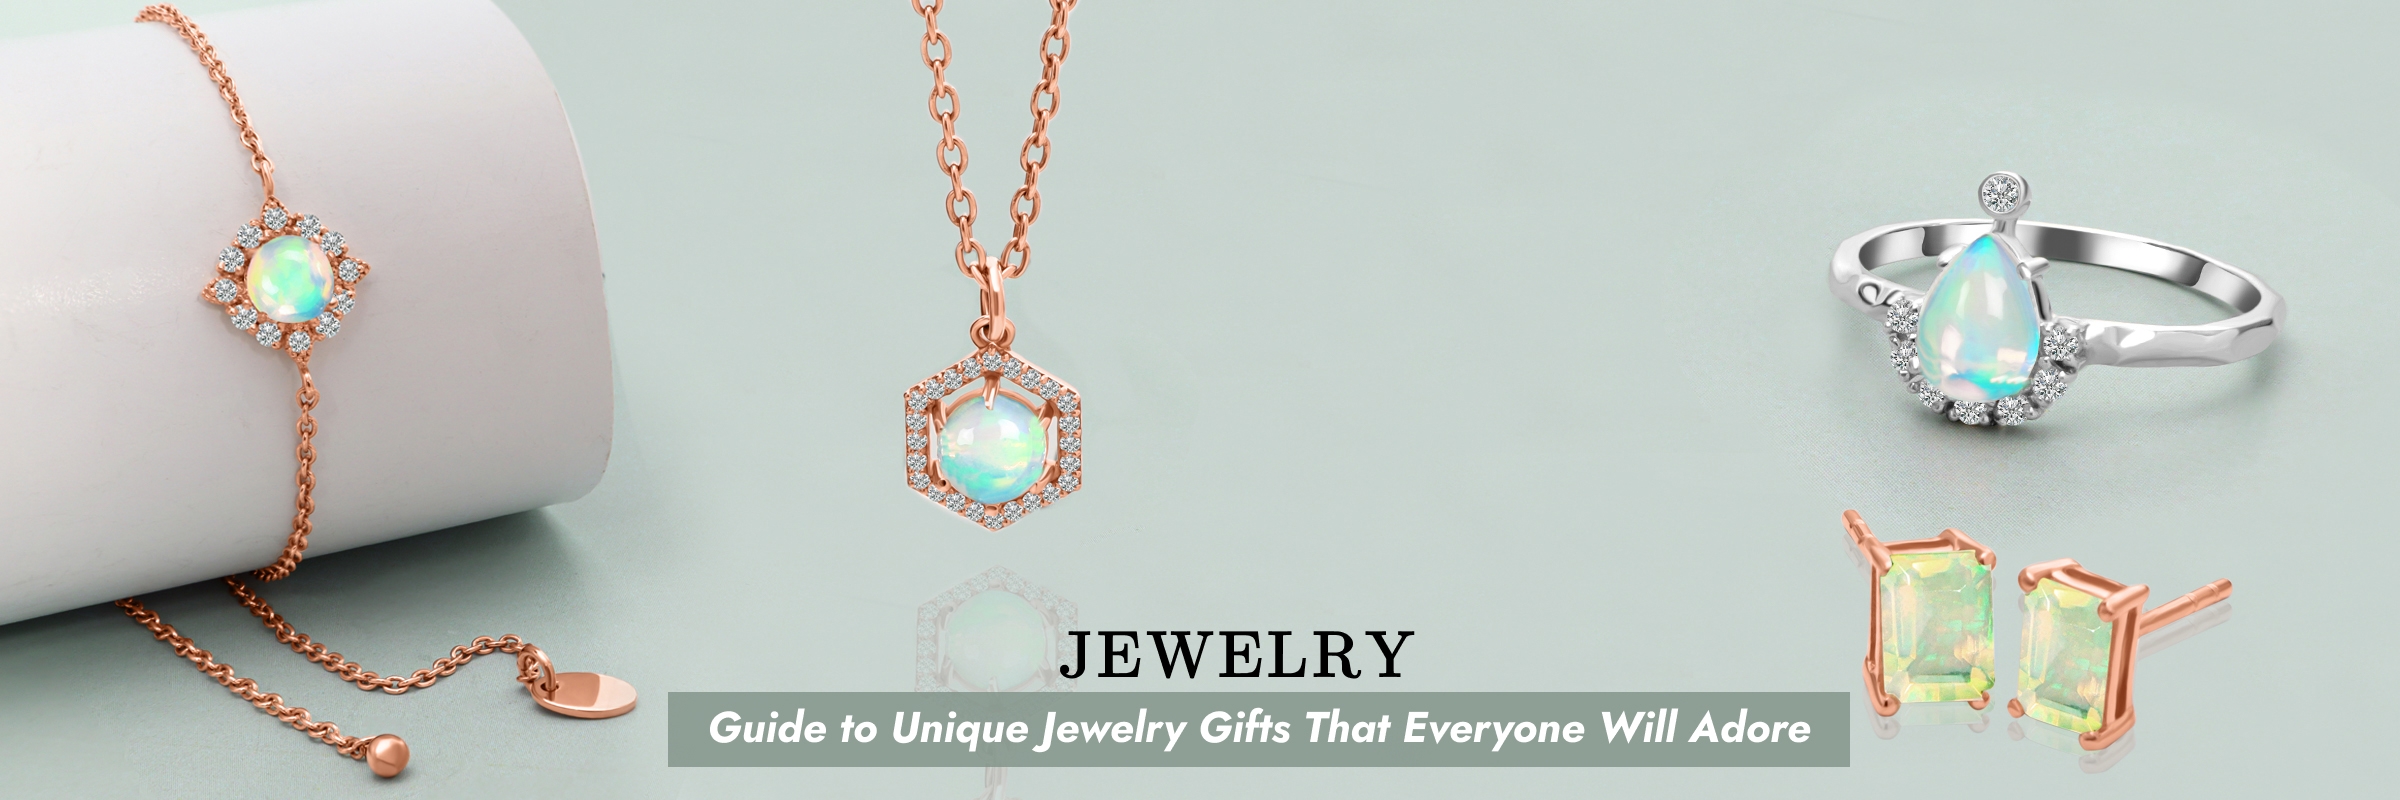 Guide to Unique Jewelry Gifts That Everyone Will Adore